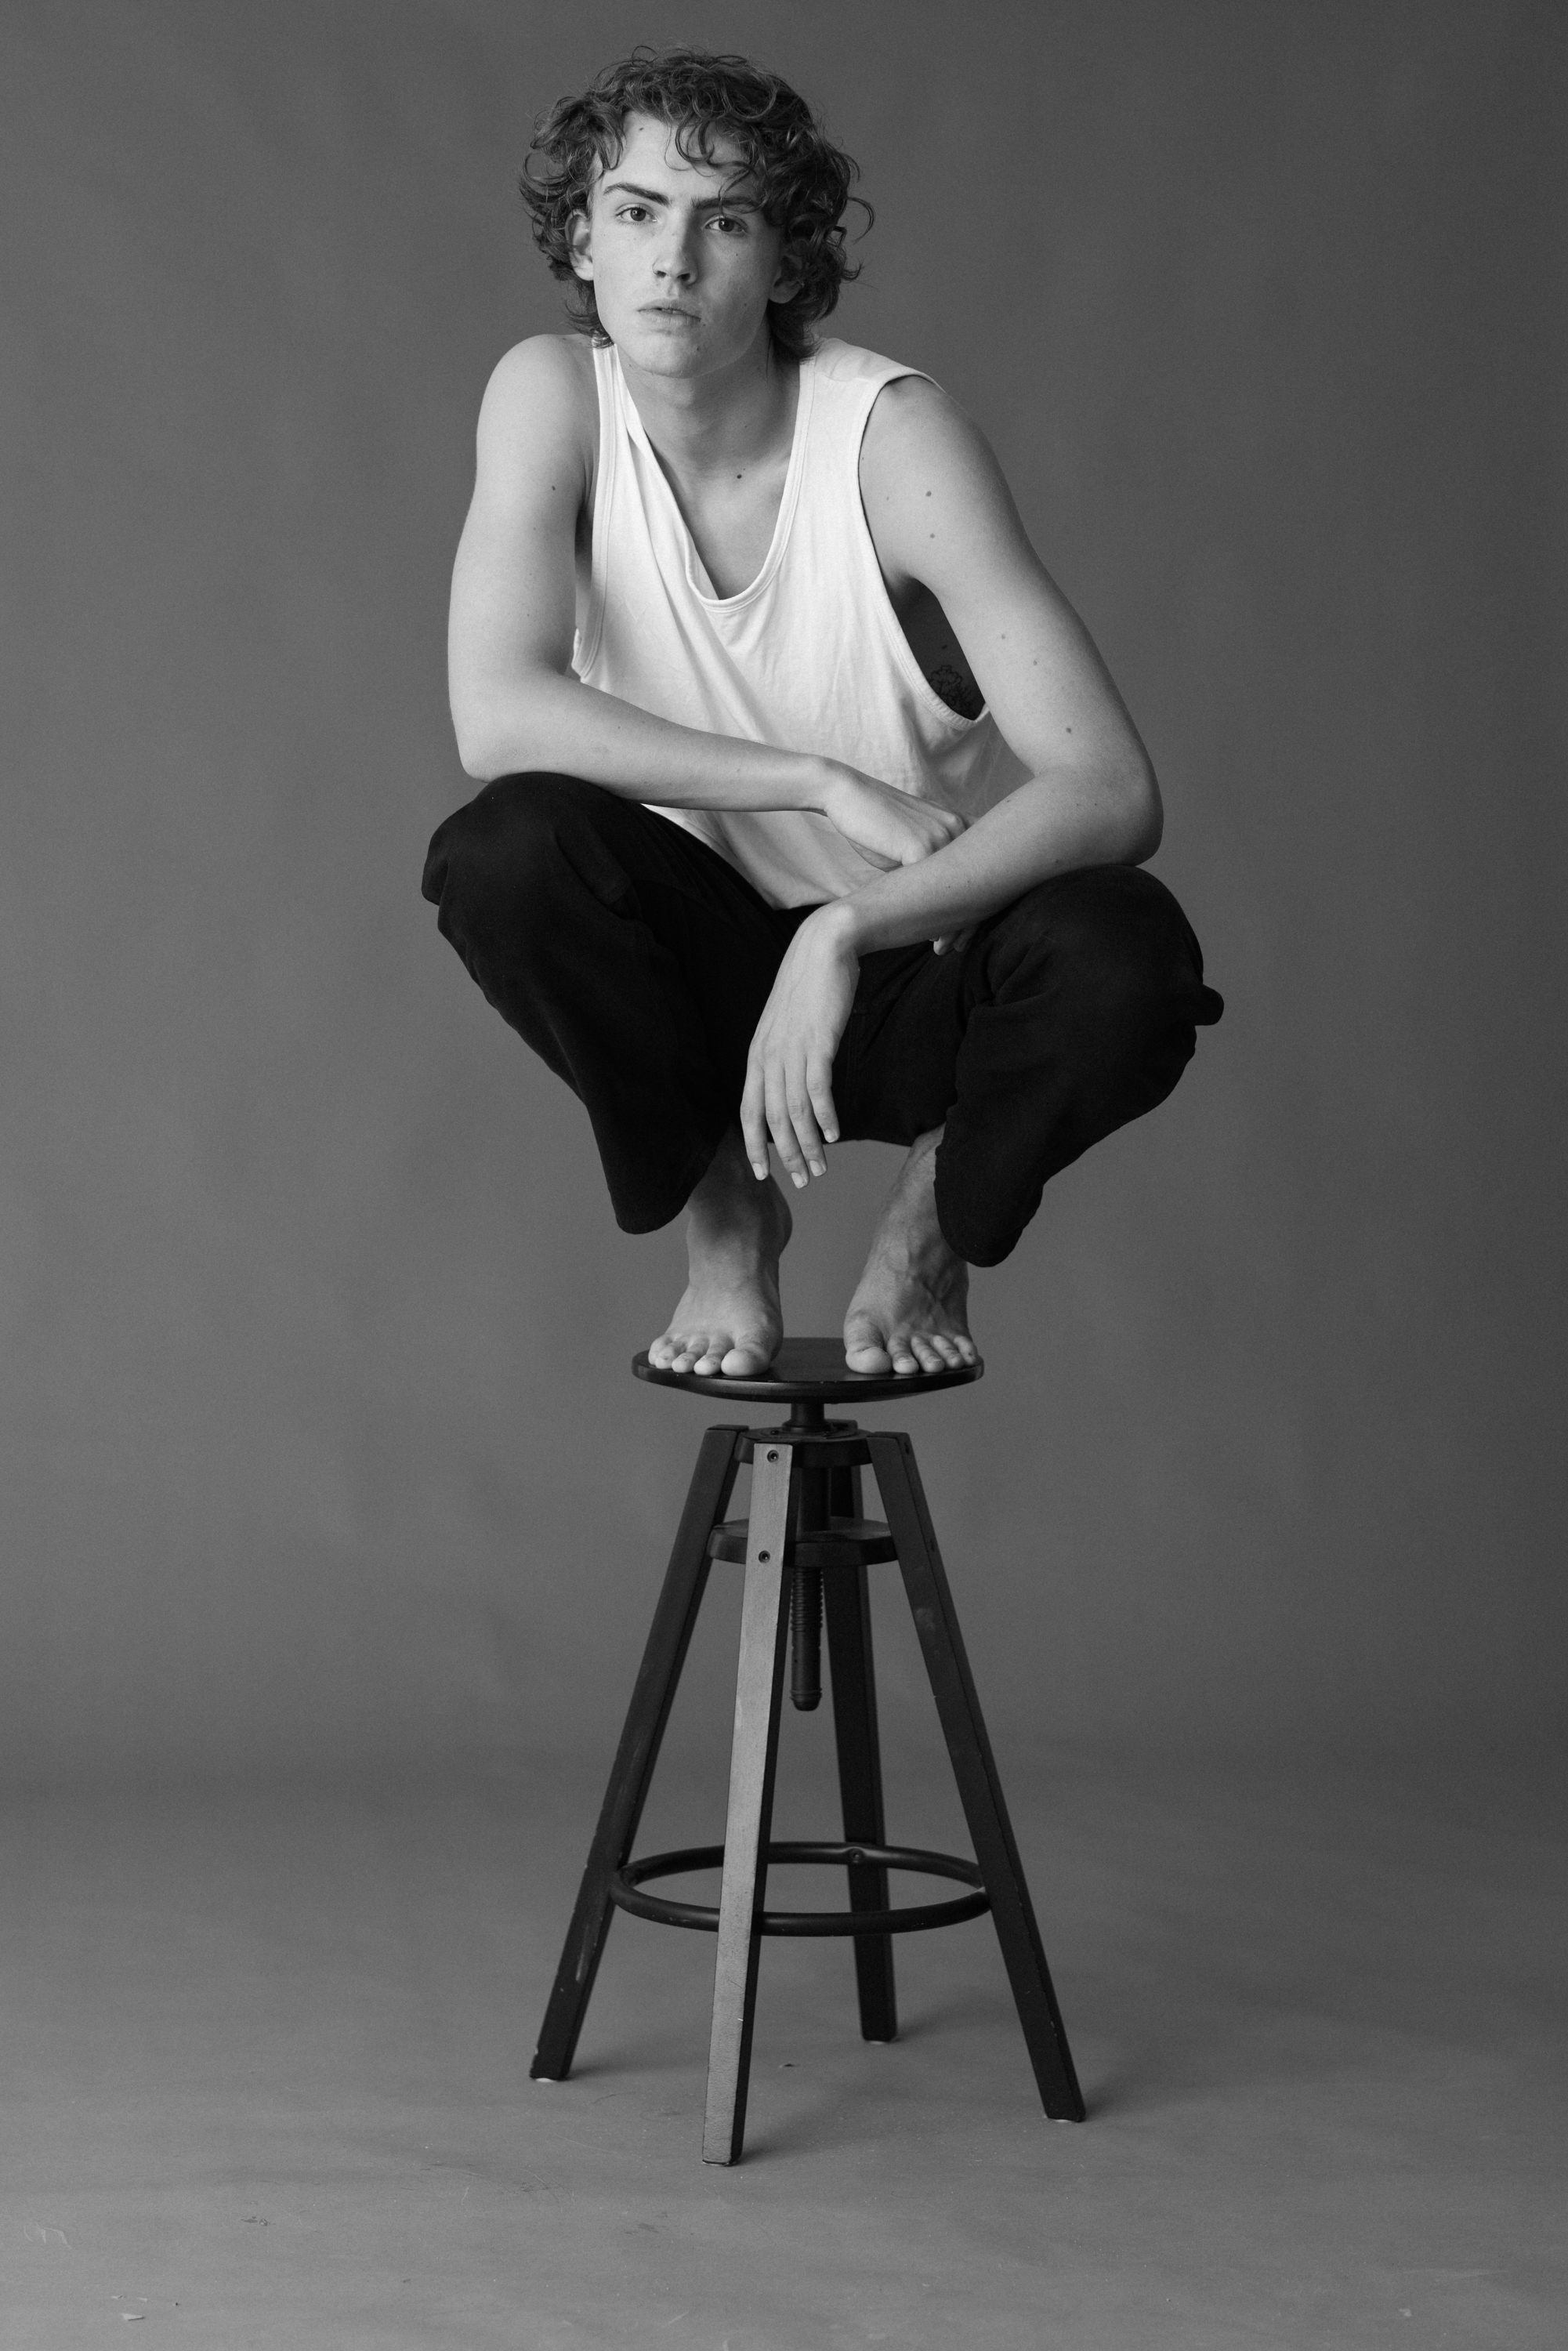 20-30 year old man sitting on stool wearing a white shirt and black pants with bare feet